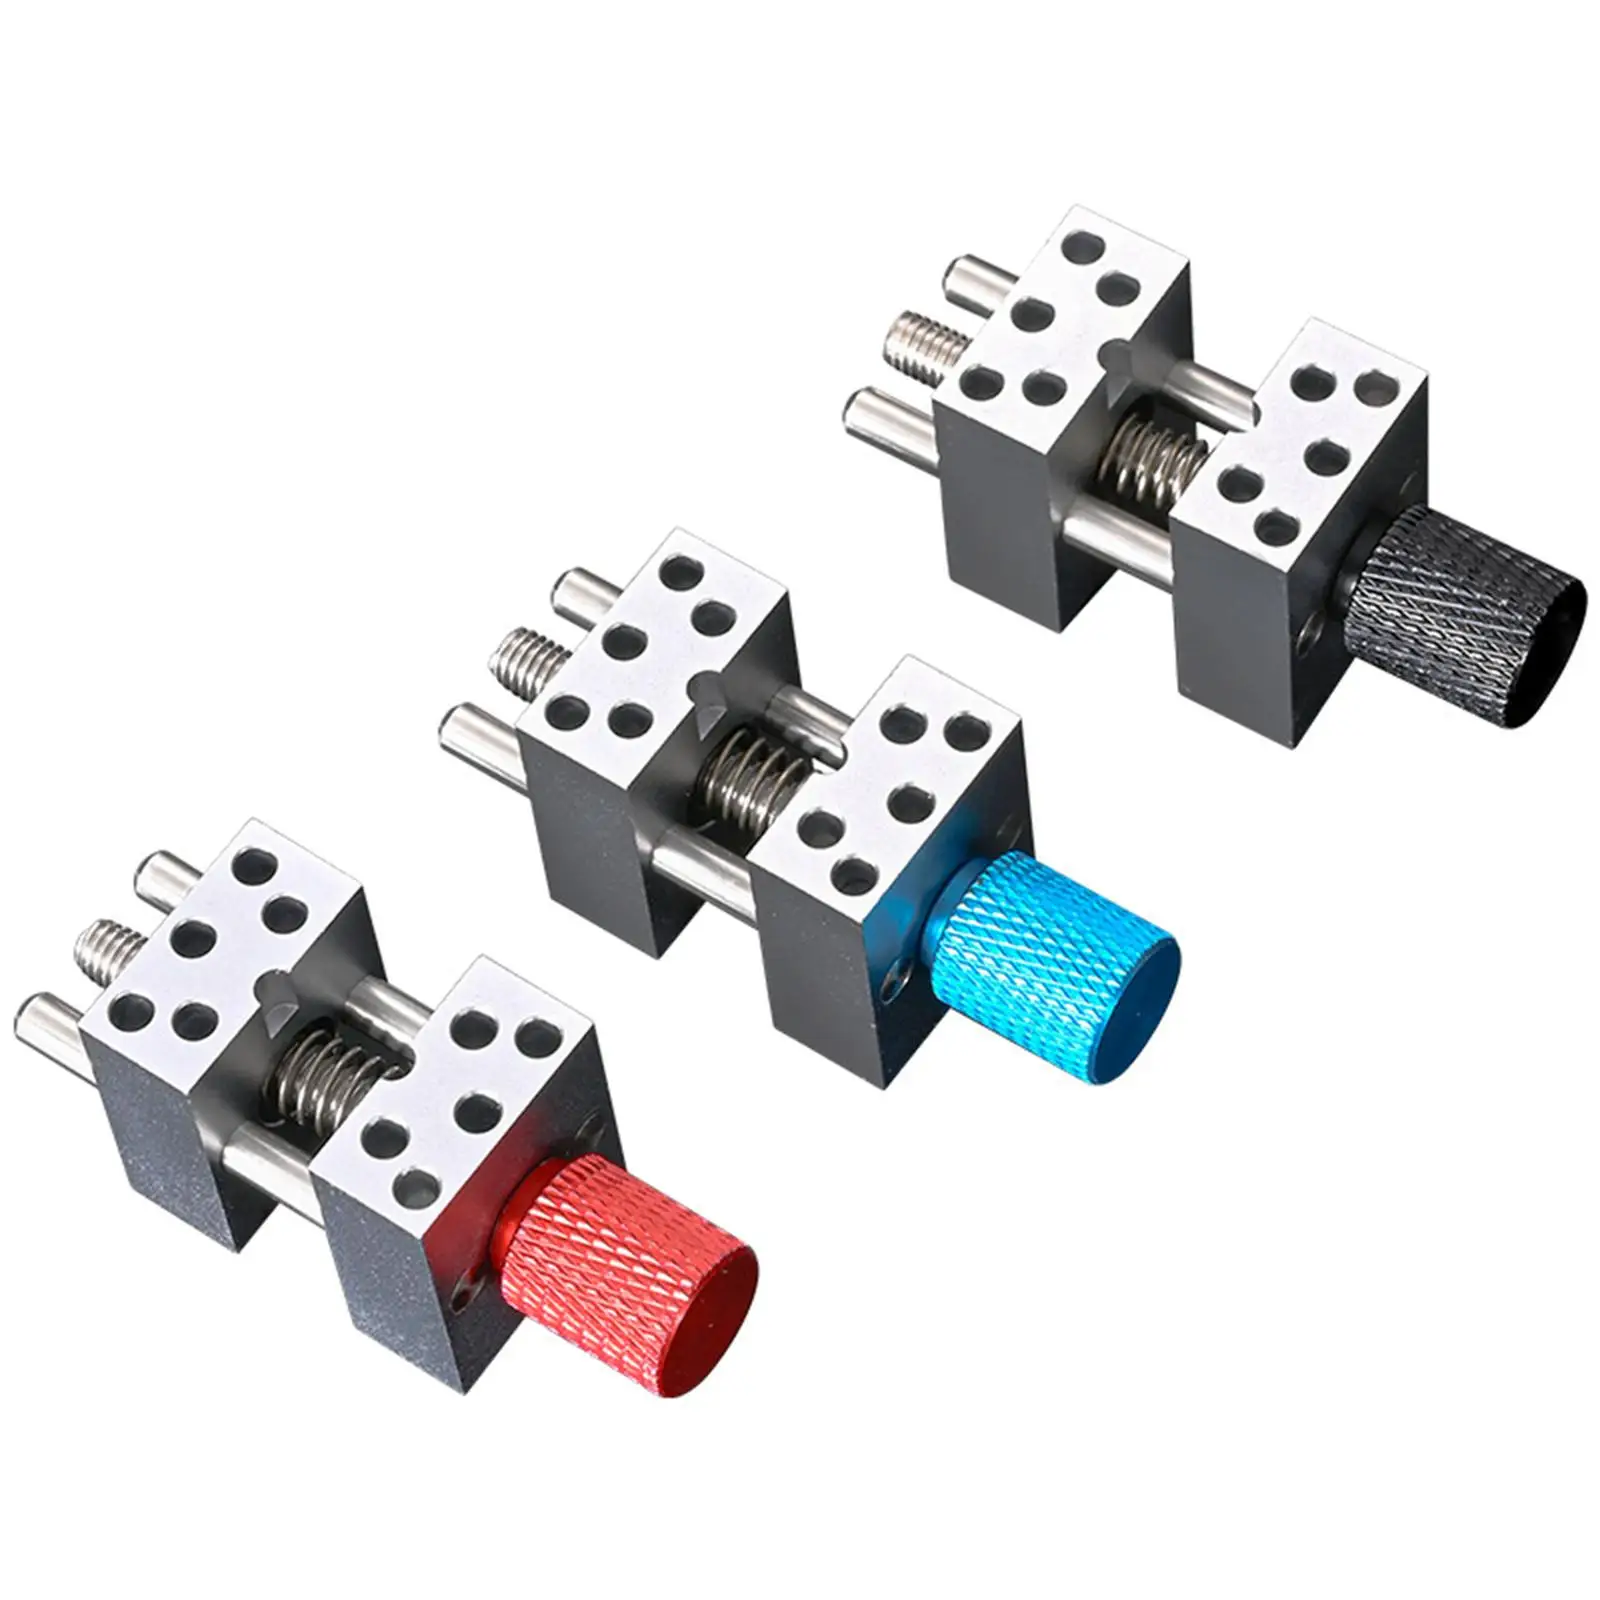 Mini Drill Press Vise Clamp Multipurpose for Watch Repairing Model Parts Engraving Cutting Jewelry Hobby Accessories Electronics